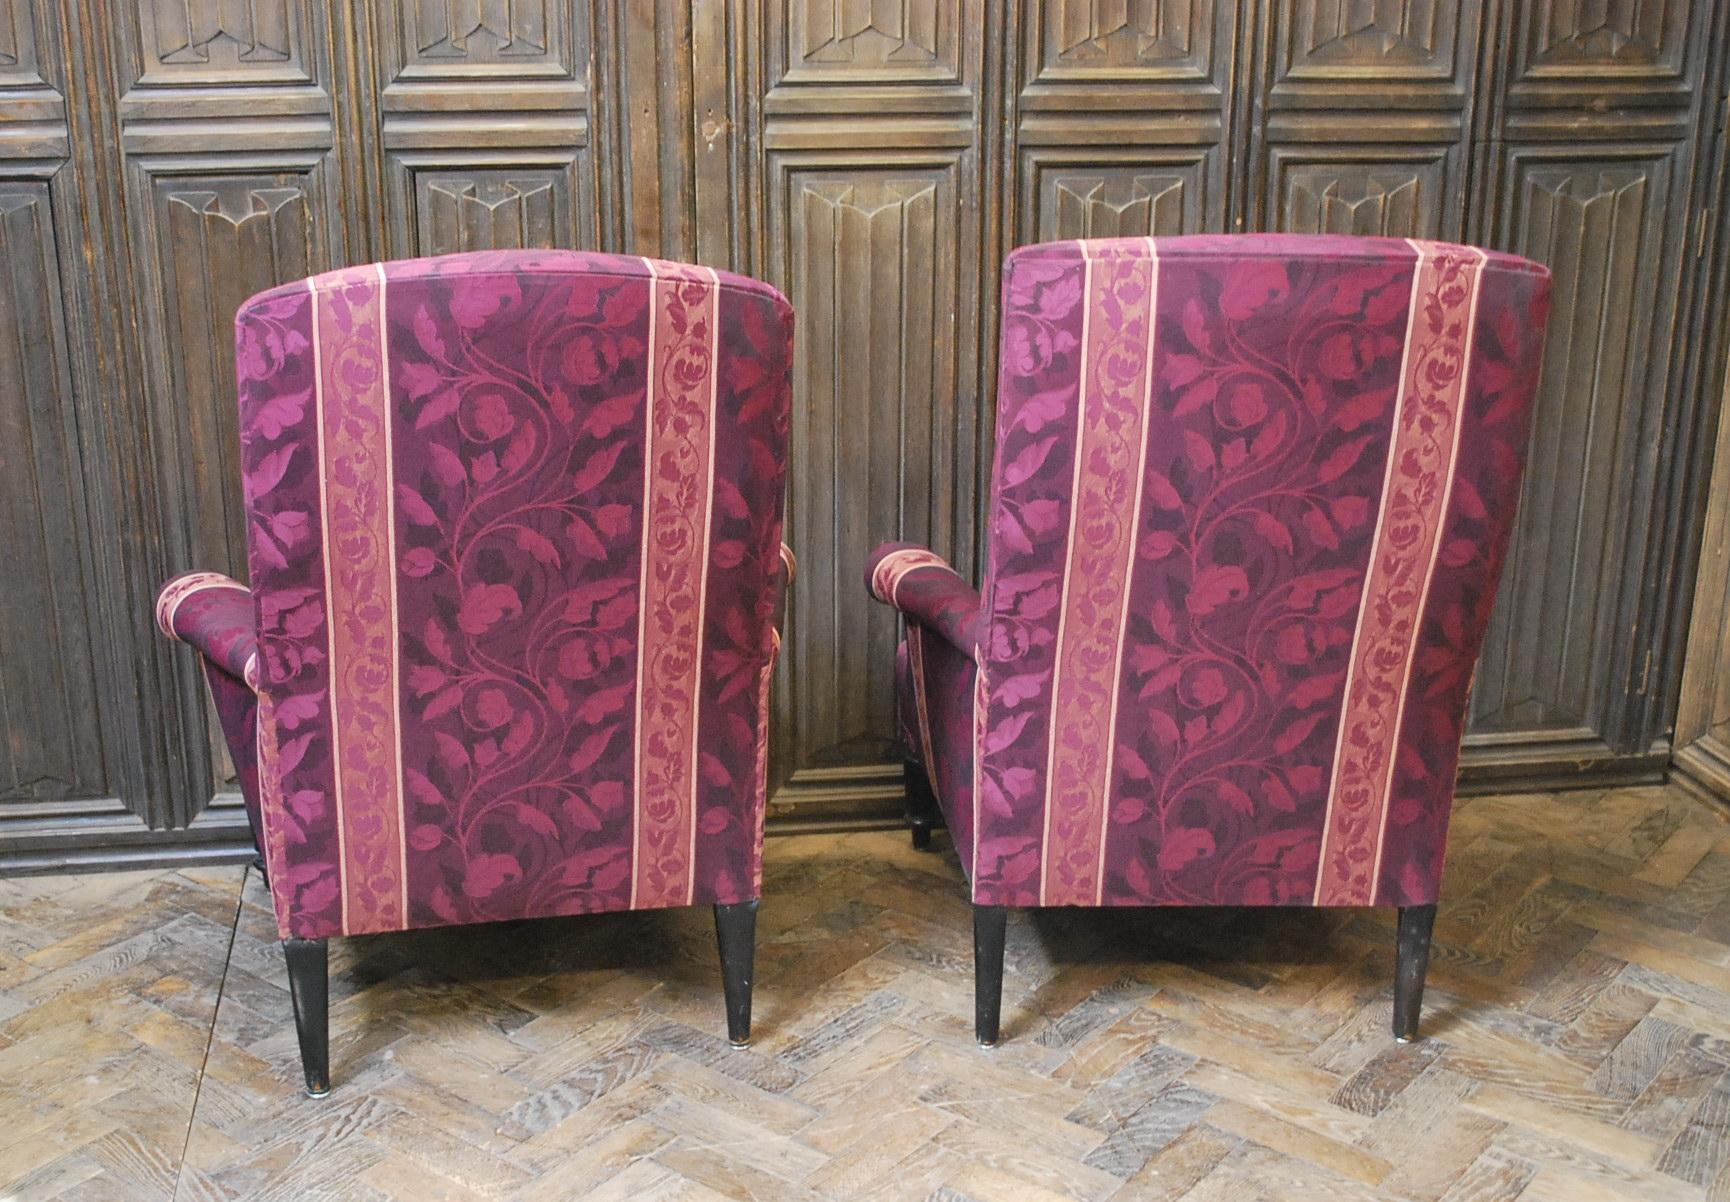 Hutton-Clarke Antiques is delighted to present a splendid pair of Napoleon III Armchairs, crafted around 1860. These exquisite chairs are tastefully upholstered in a regal shade of purple fabric, which beautifully complements their design.

Resting